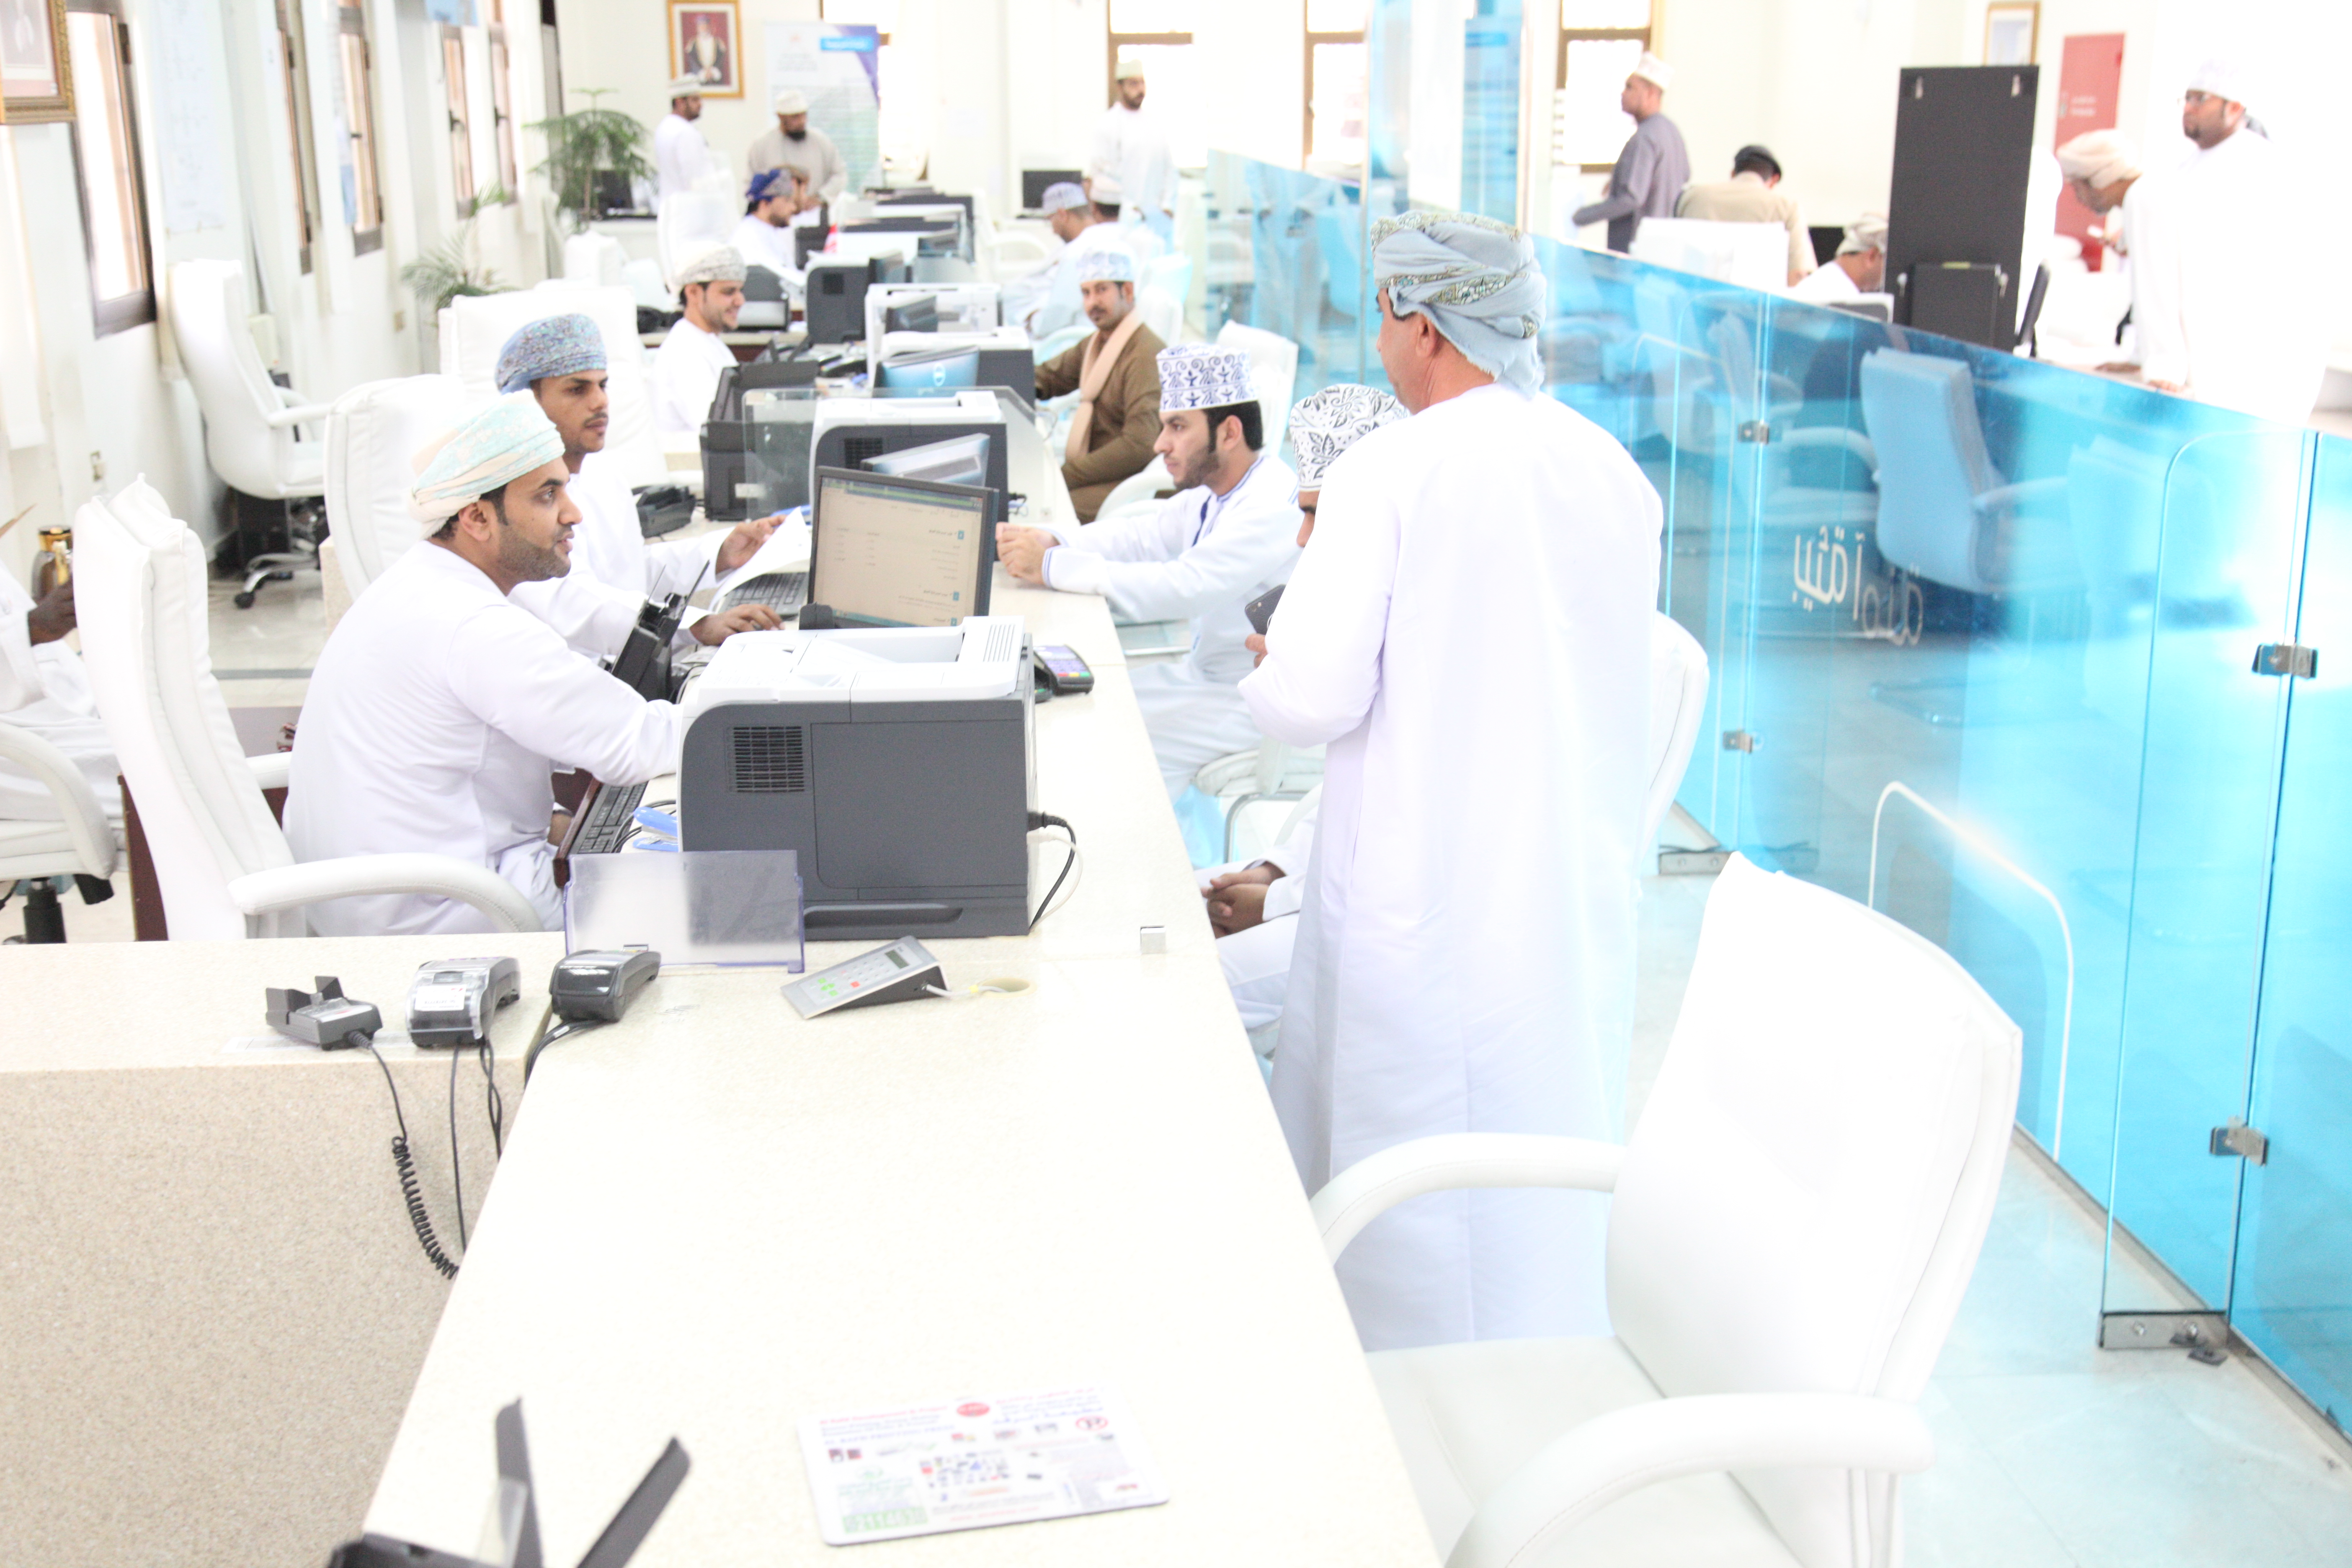 Registrations through Oman's Invest Easy portal grow by 450%